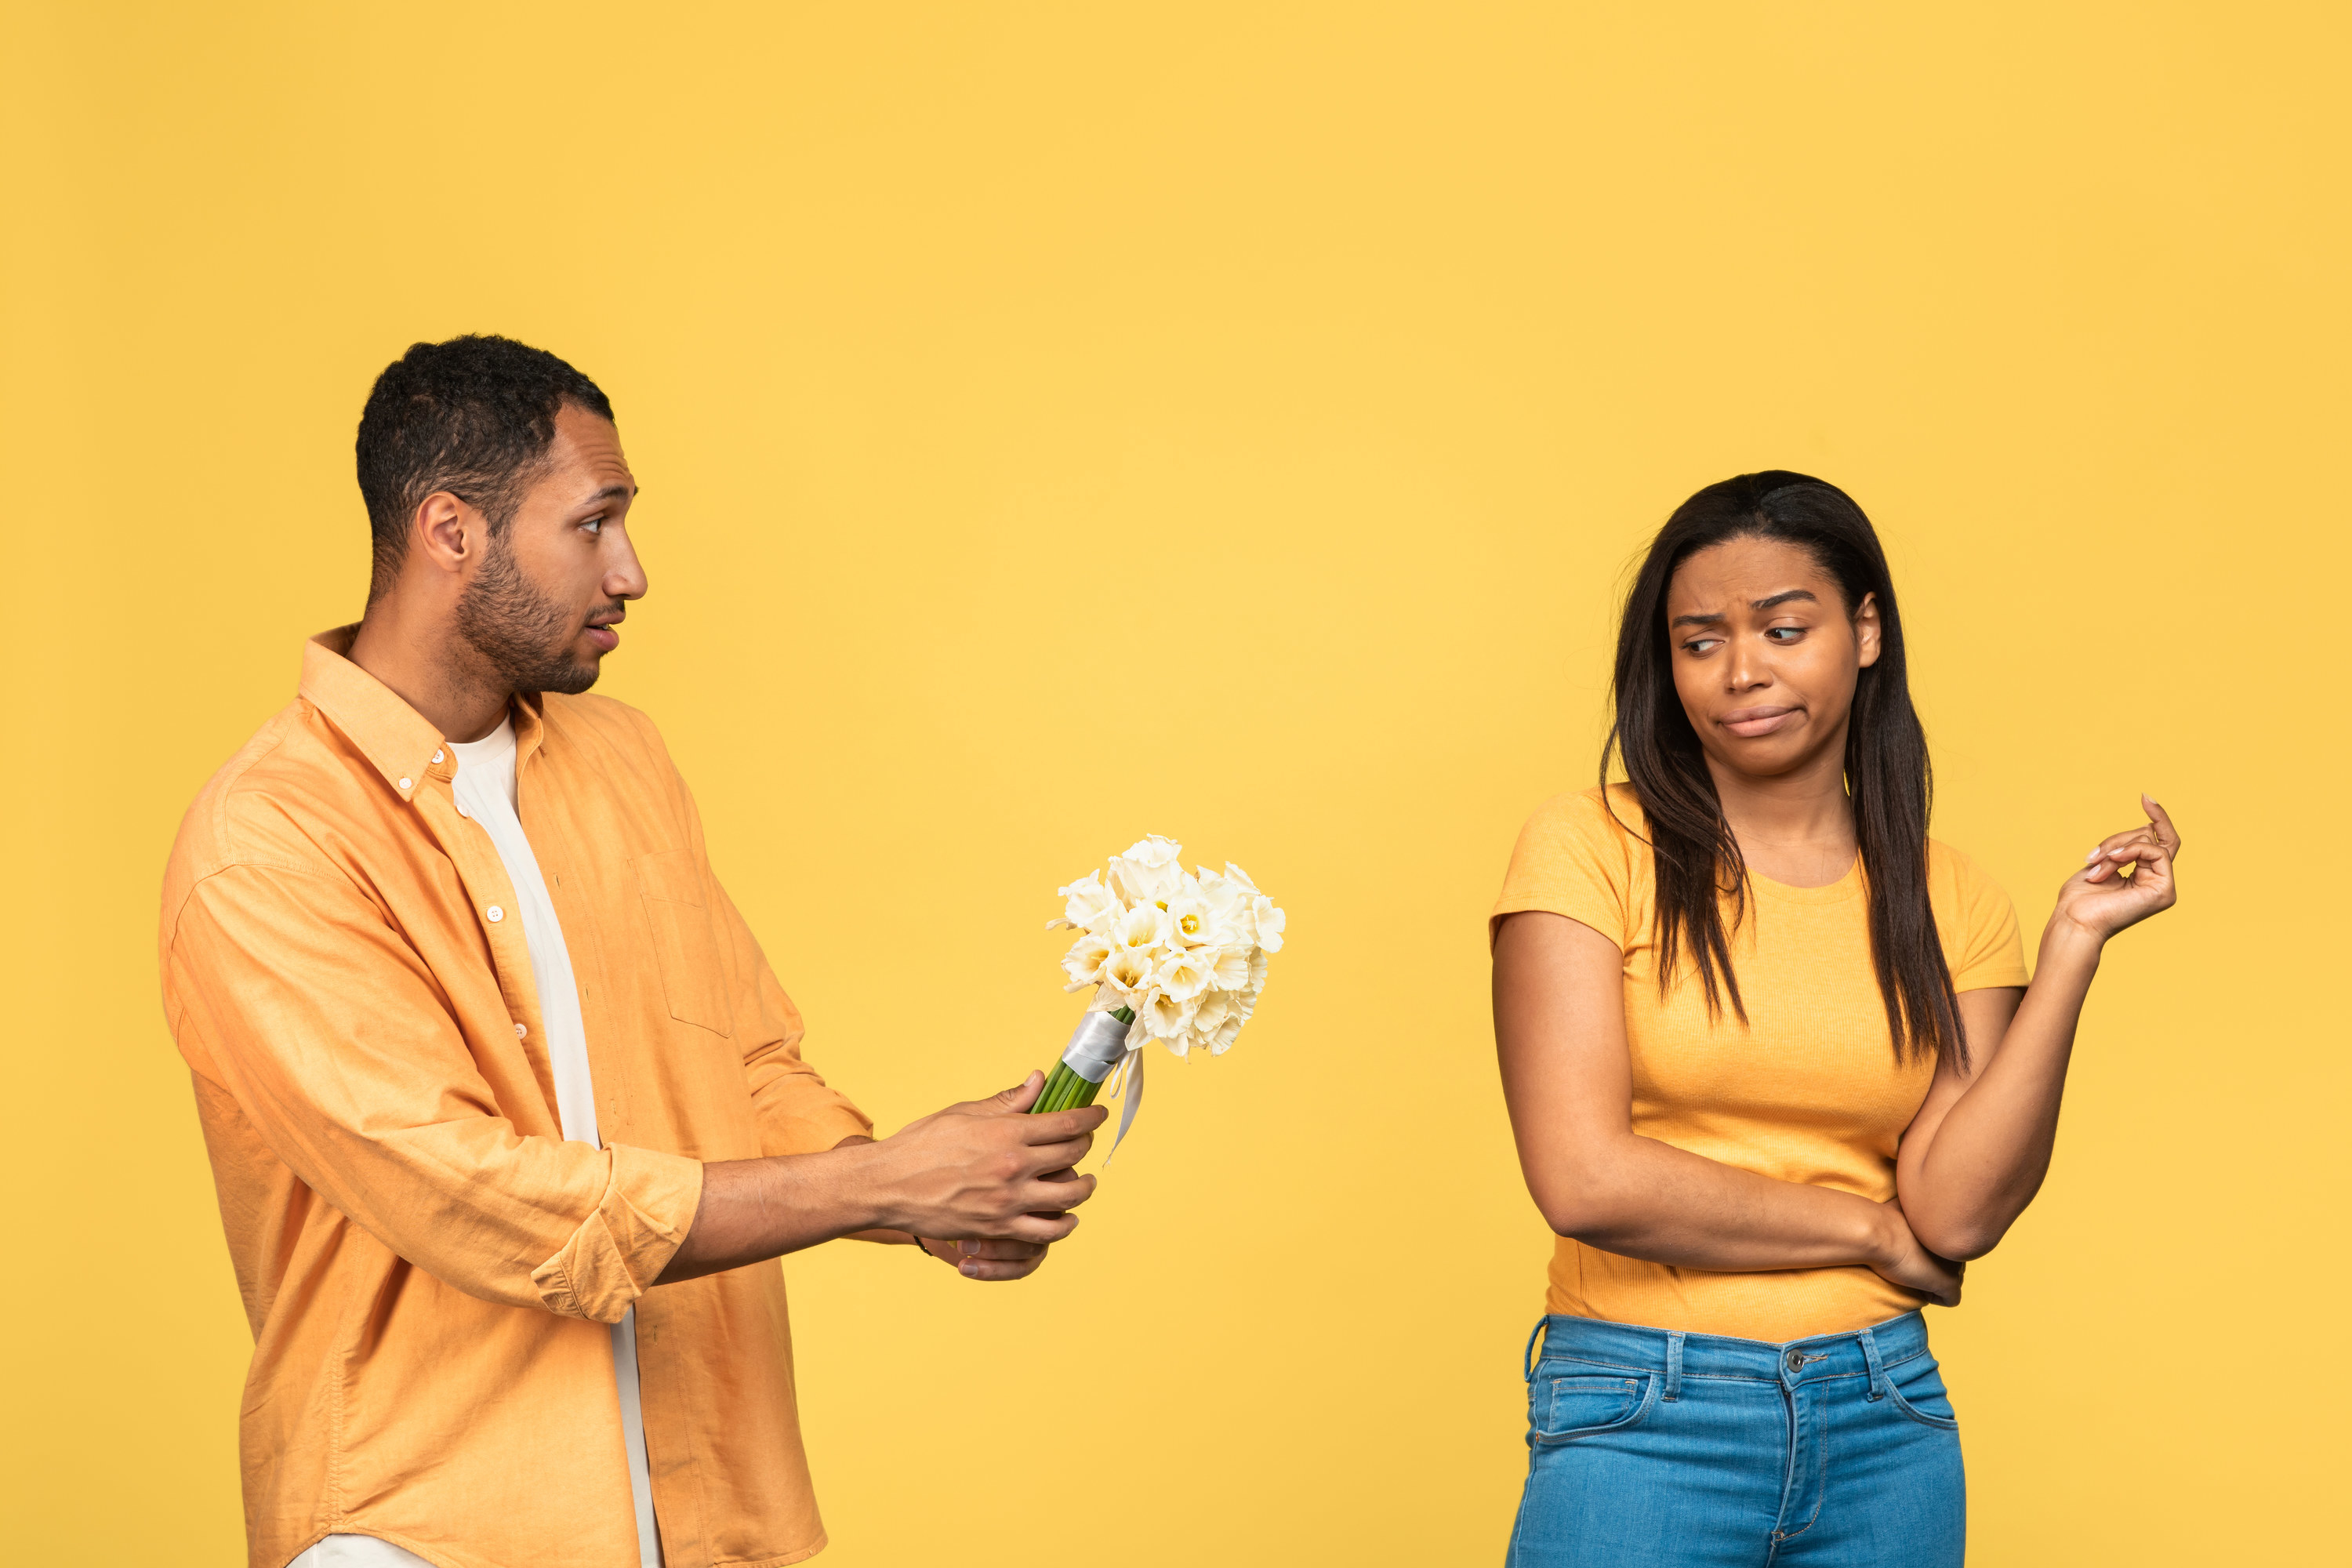 A man trying to give a woman flowers while she looks at them skeptically